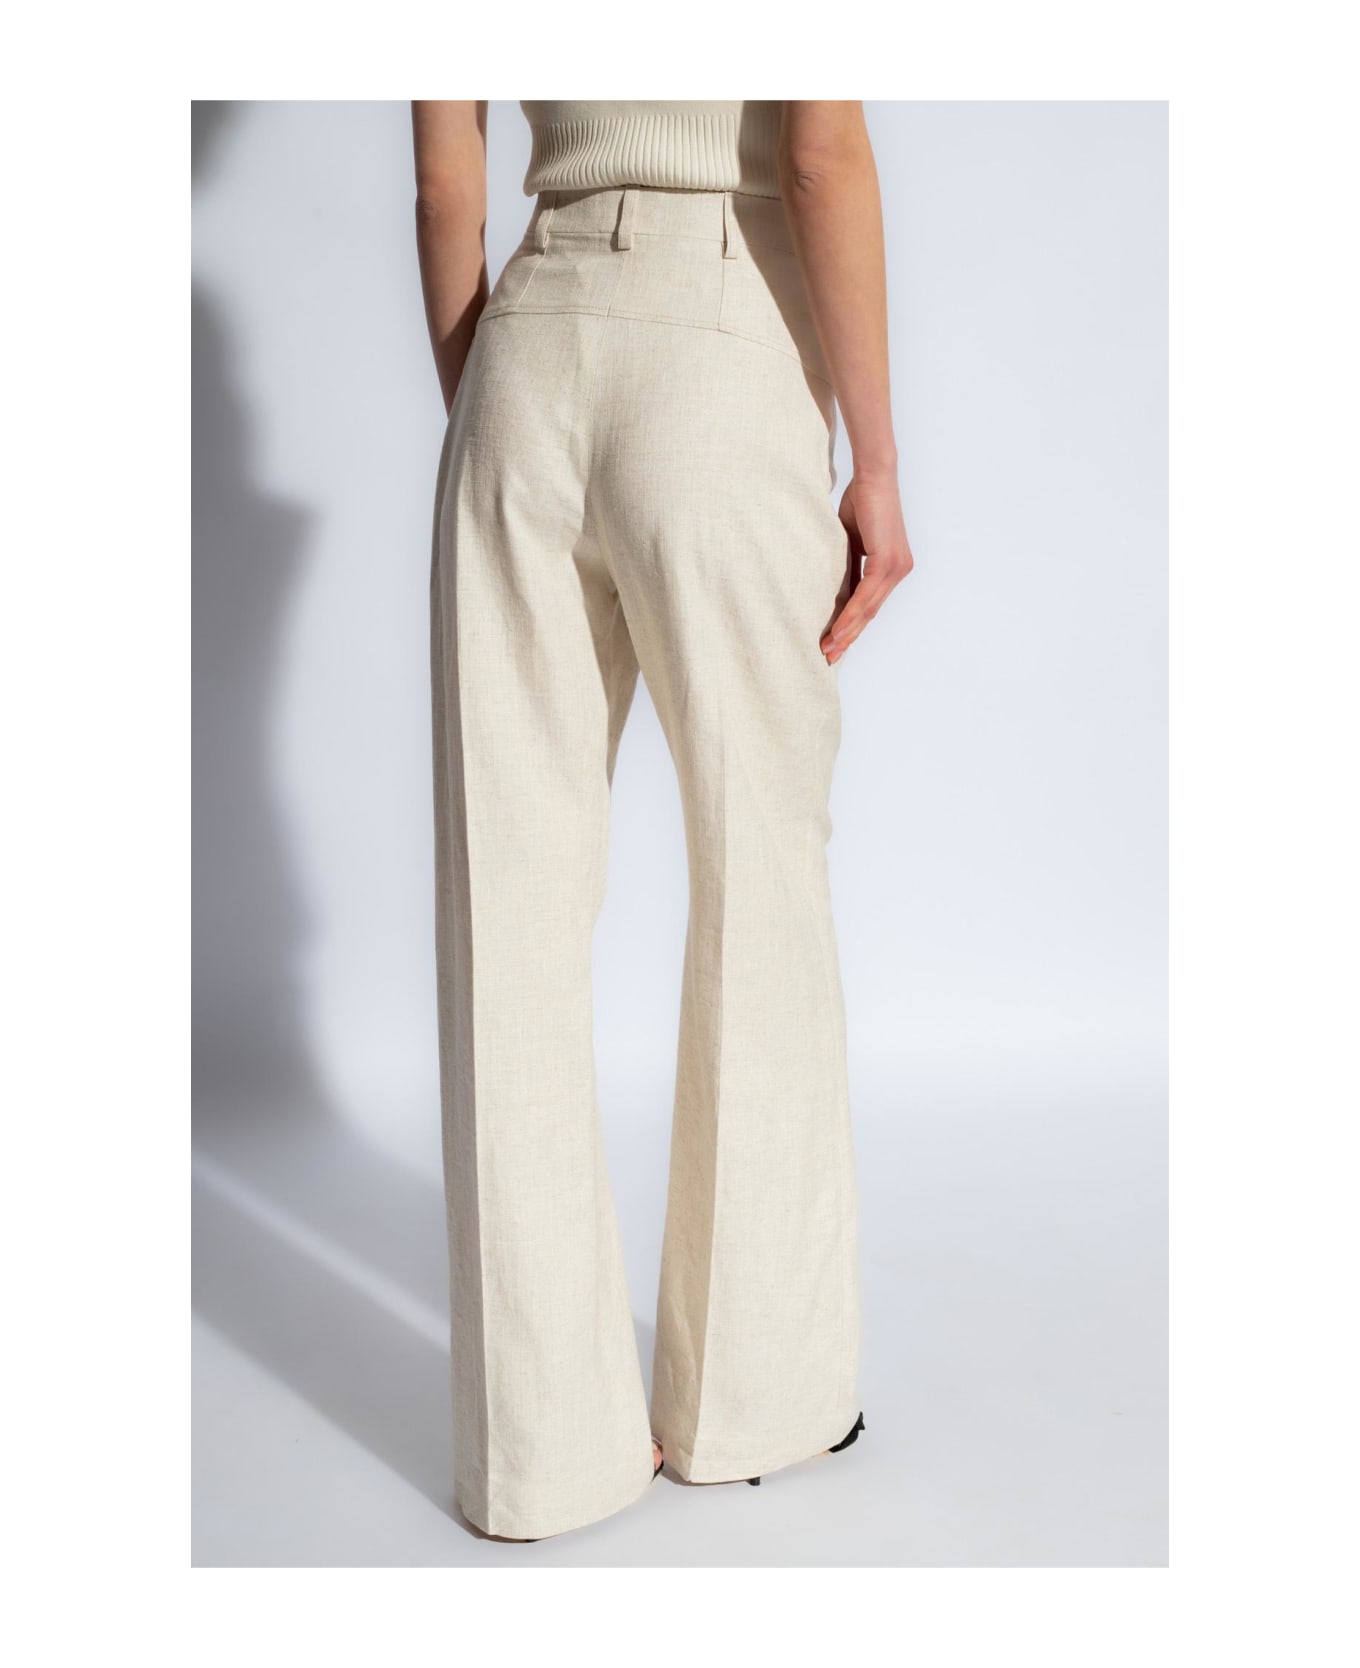 Jacquemus Sauge Viscose And Linen Trousers - Light beige ボトムス